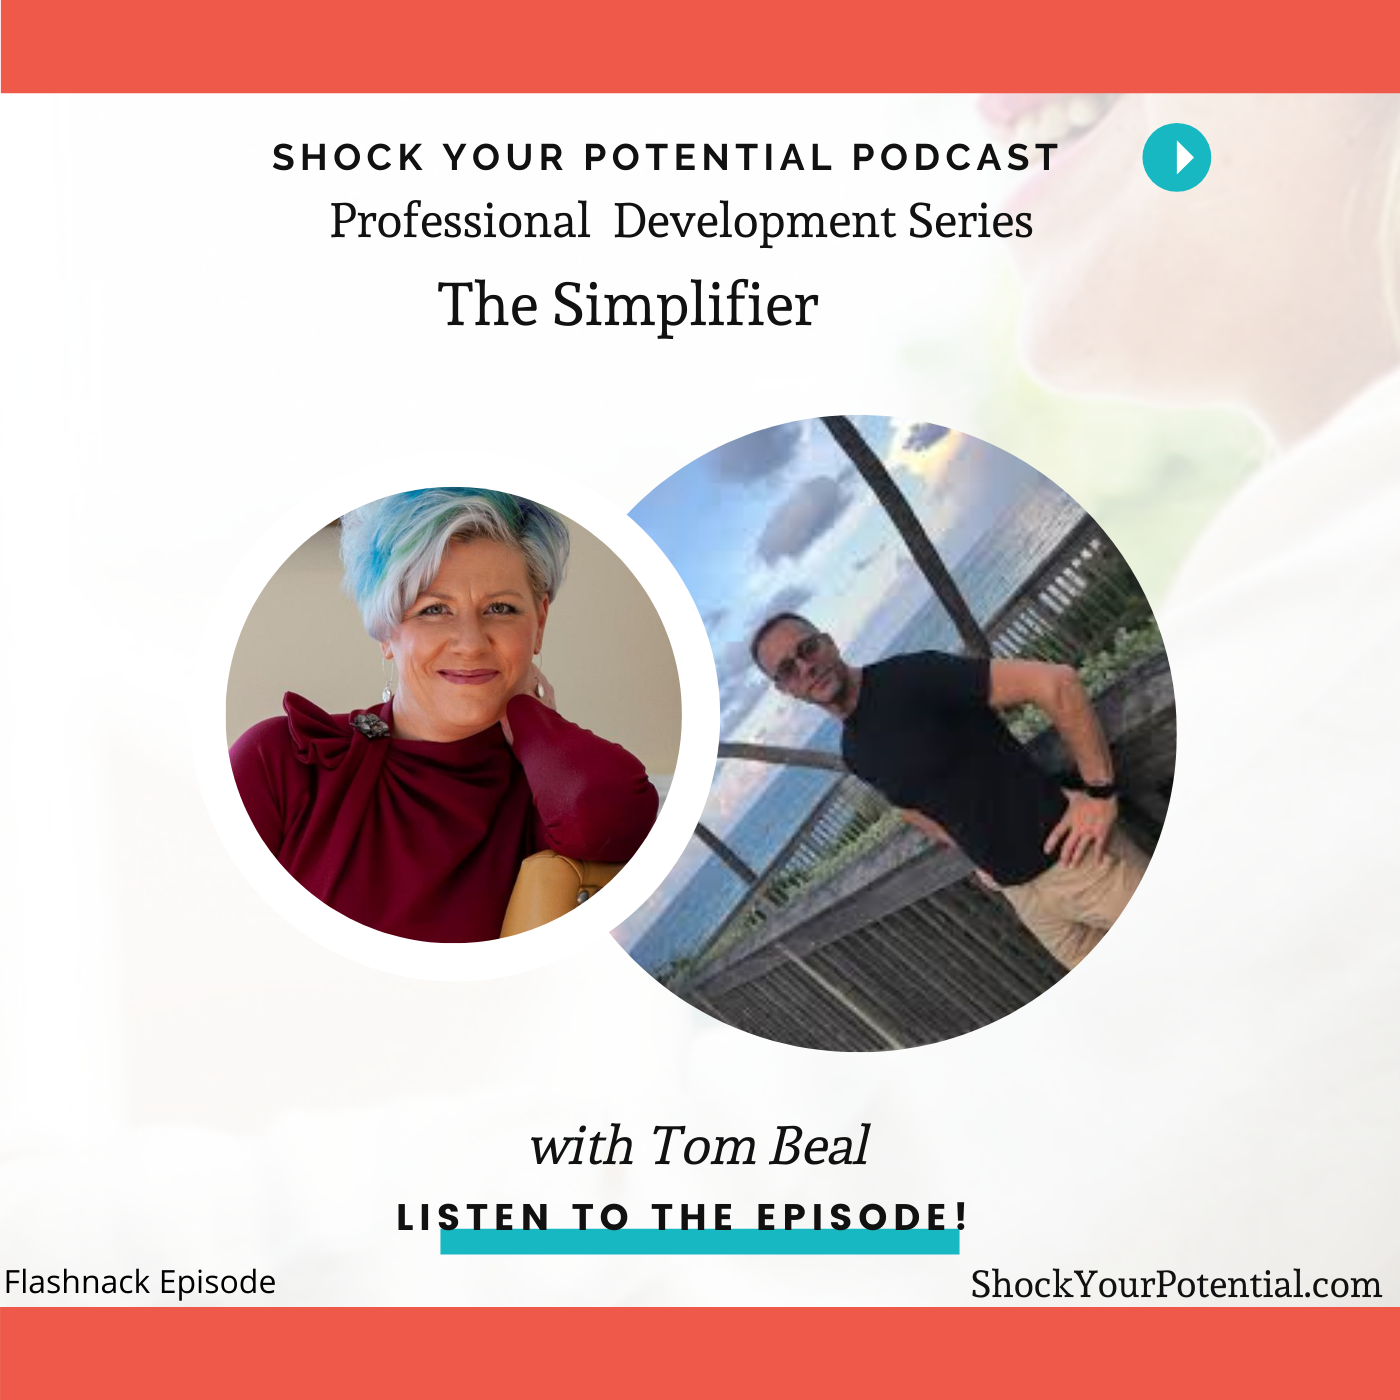 The Simplifier – Tom Beal